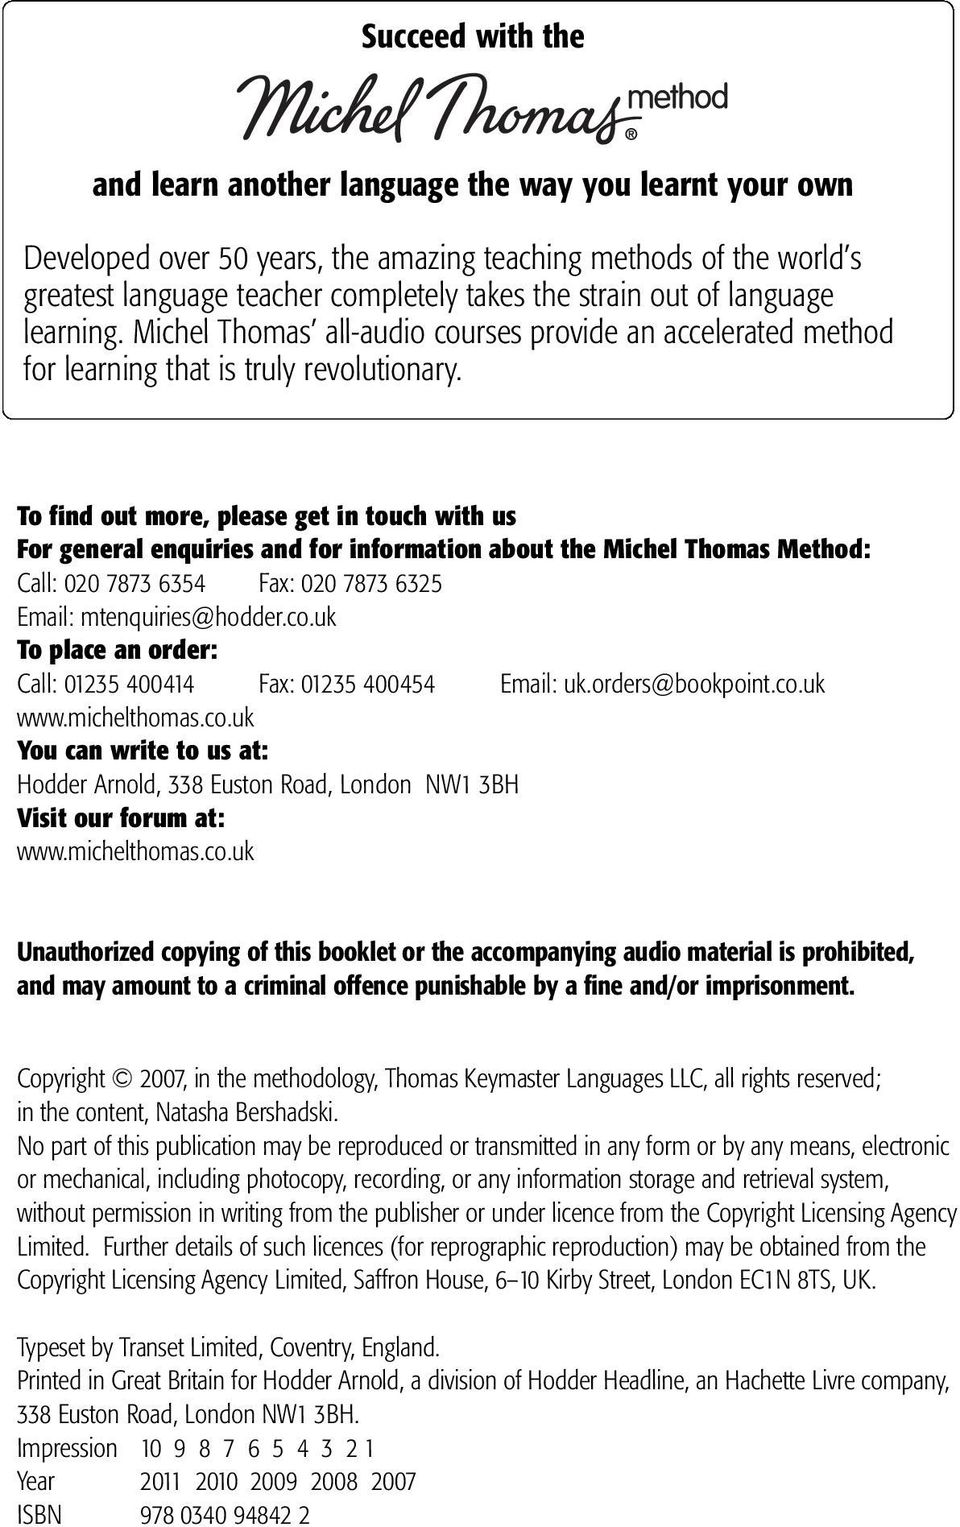 To find out more, please get in touch with us For general enquiries and for information about the Michel Thomas Method: Call: 020 7873 6354 Fax: 020 7873 6325 Email: mtenquiries@hodder.co.